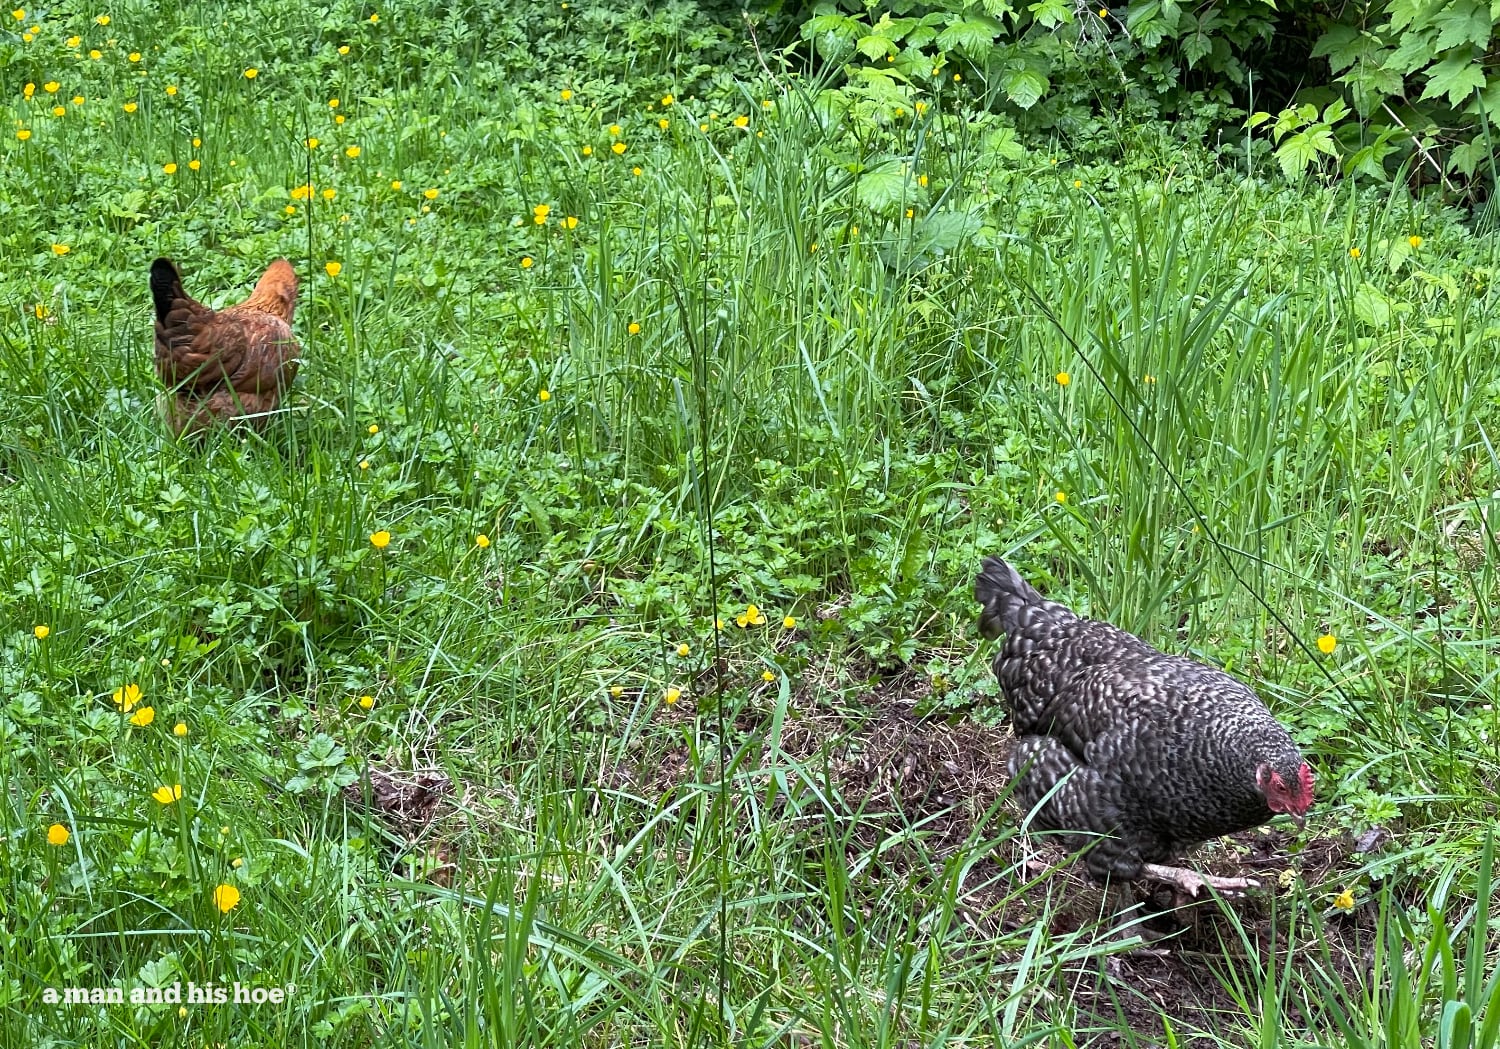 Chickens foraging in the grass